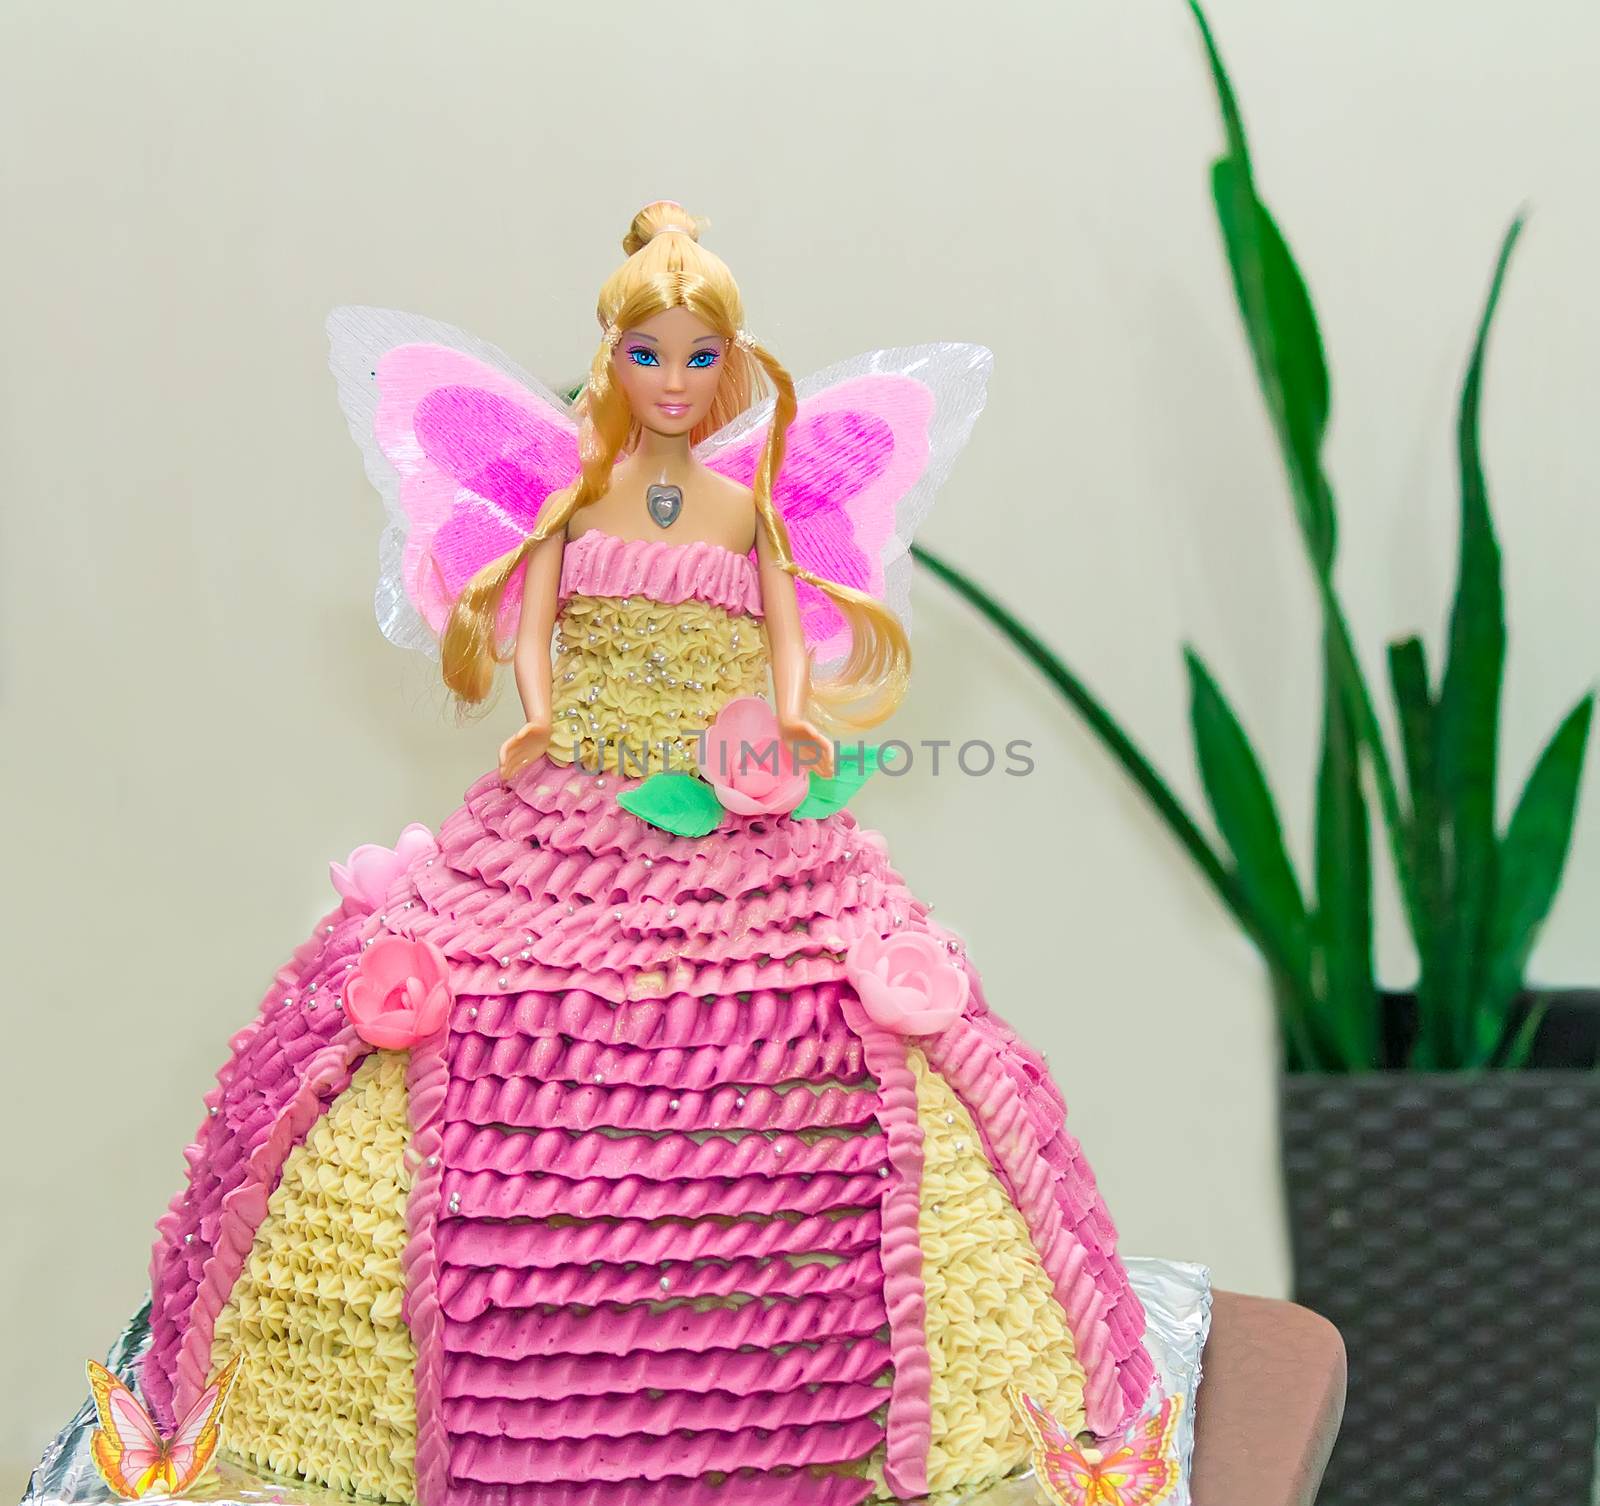 Beautiful birthday cake in the form of a doll in a wide dress, made of sponge cake and decorated with pink and yellow cream.